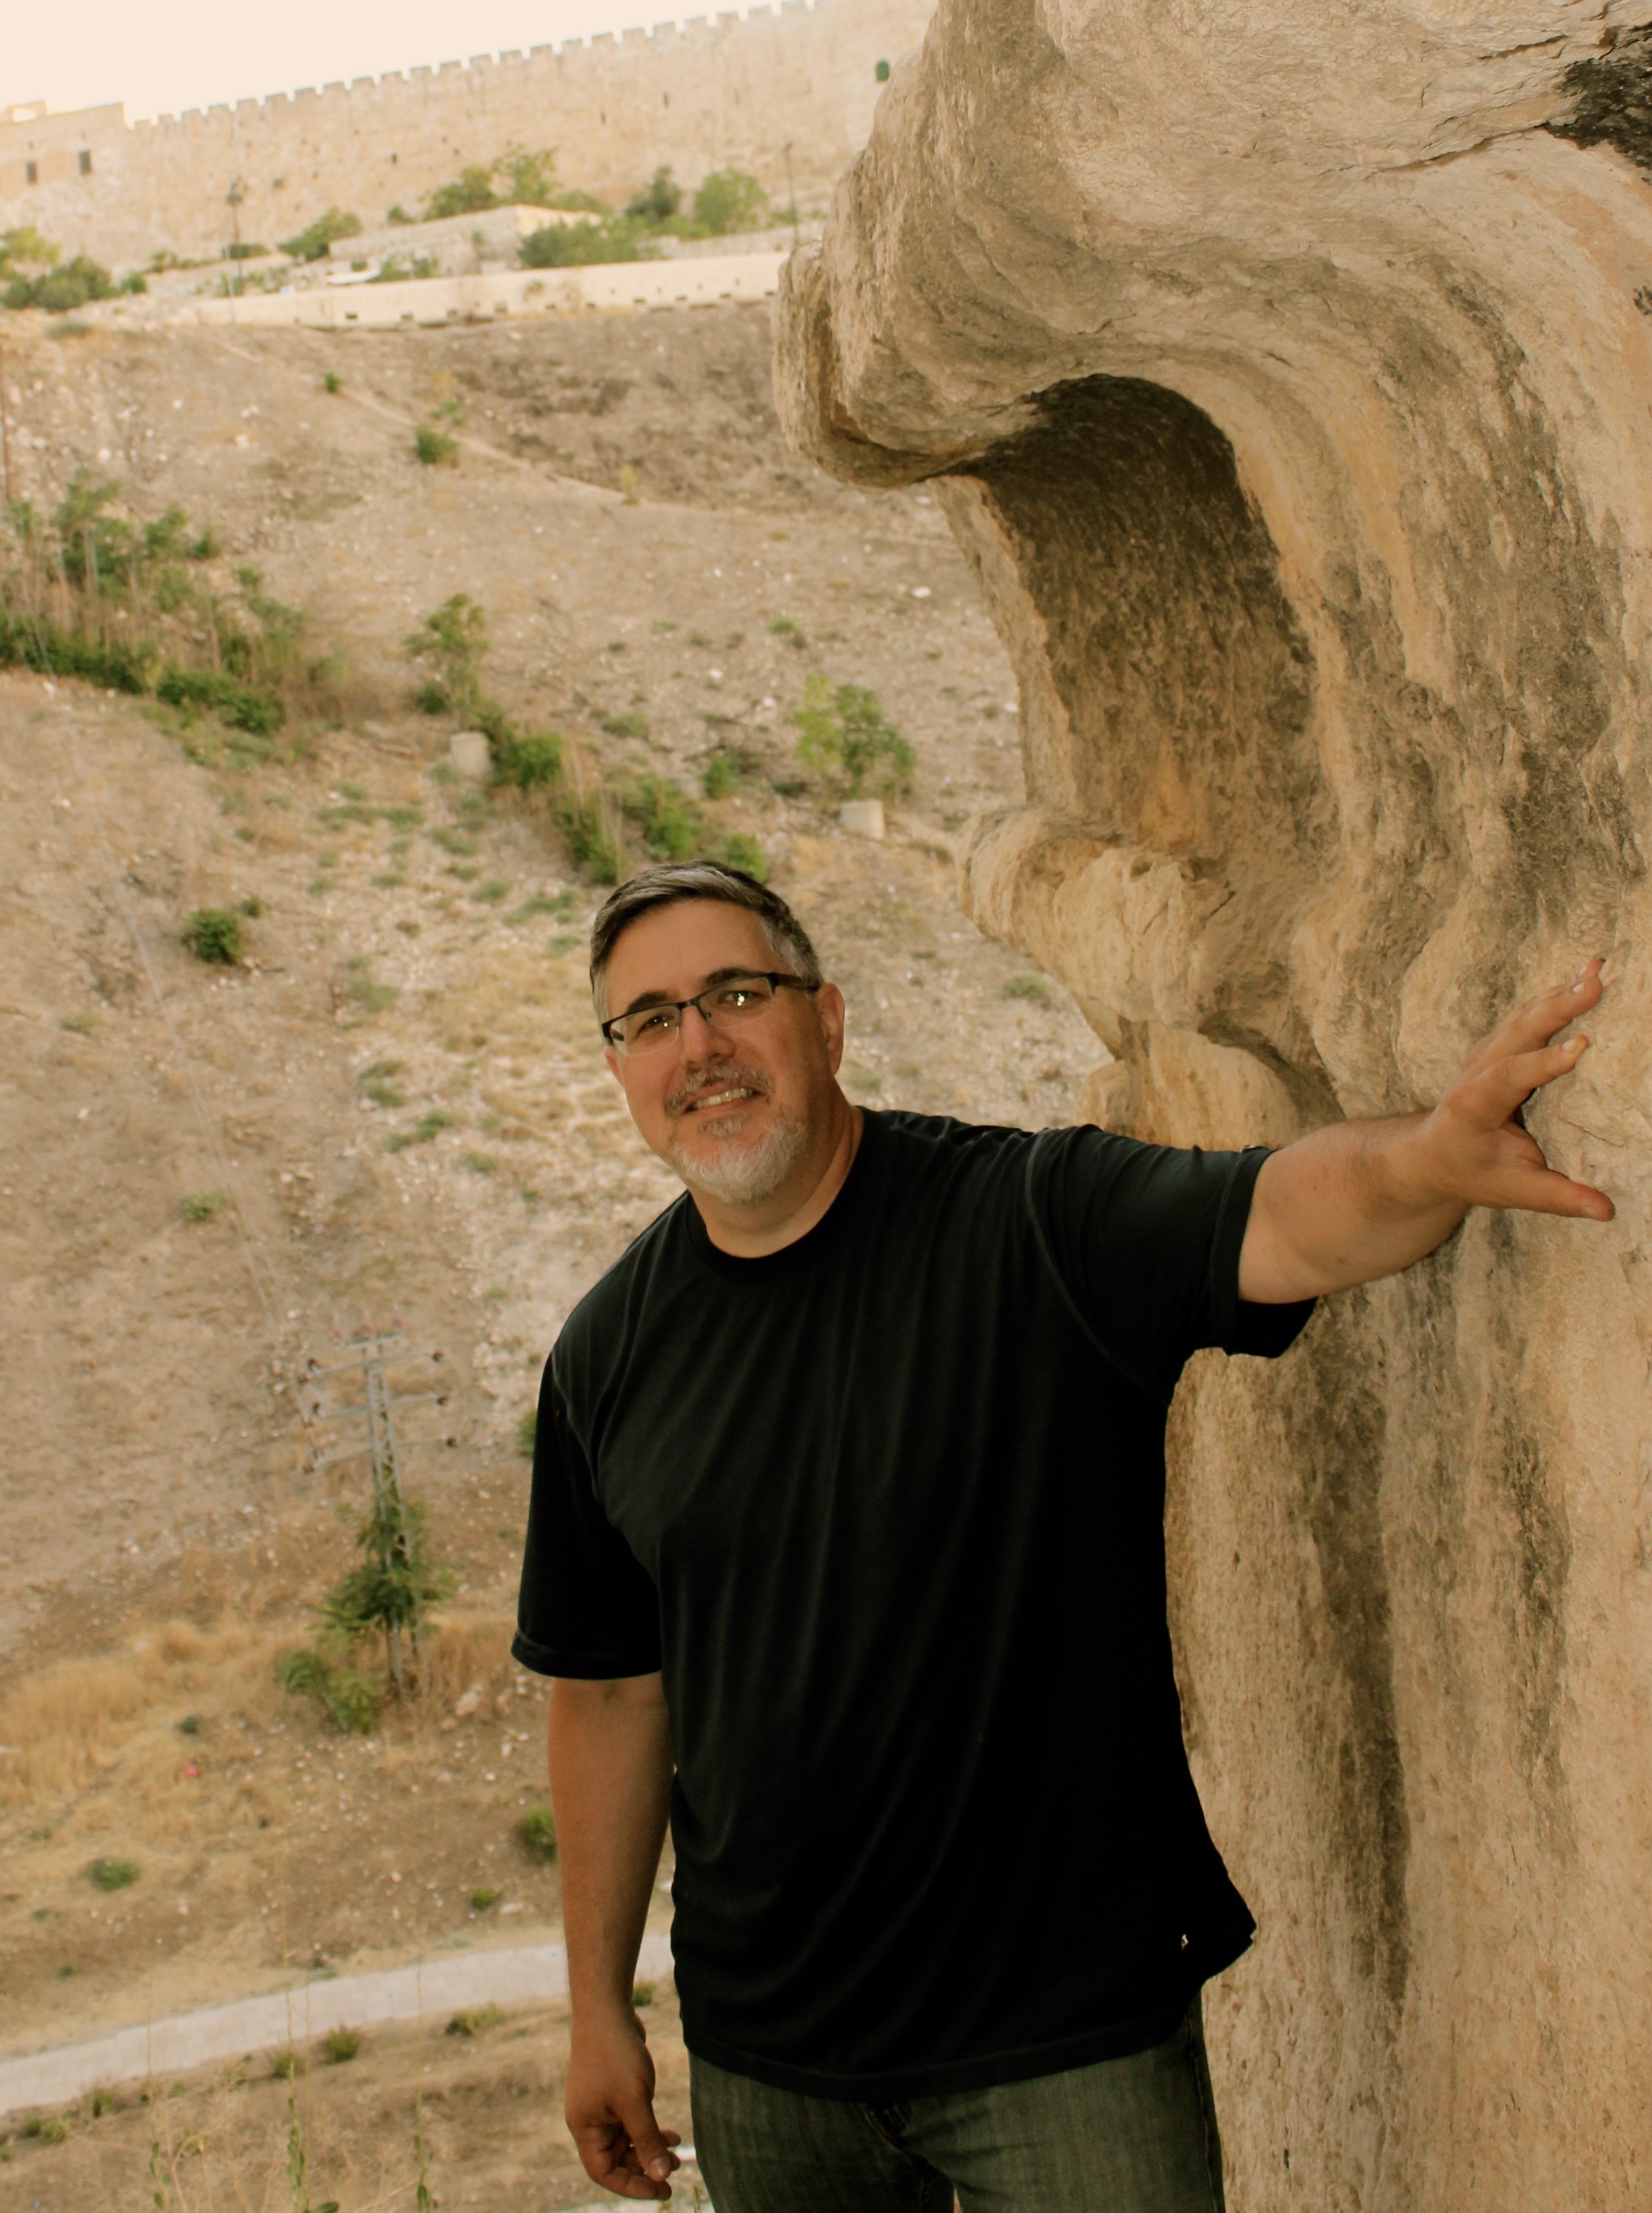 Professor Suriano standing next to a monolithic-tomb in Jerusalem. The tomb's cornice is visible above him and in the background is the Kidron Valley.